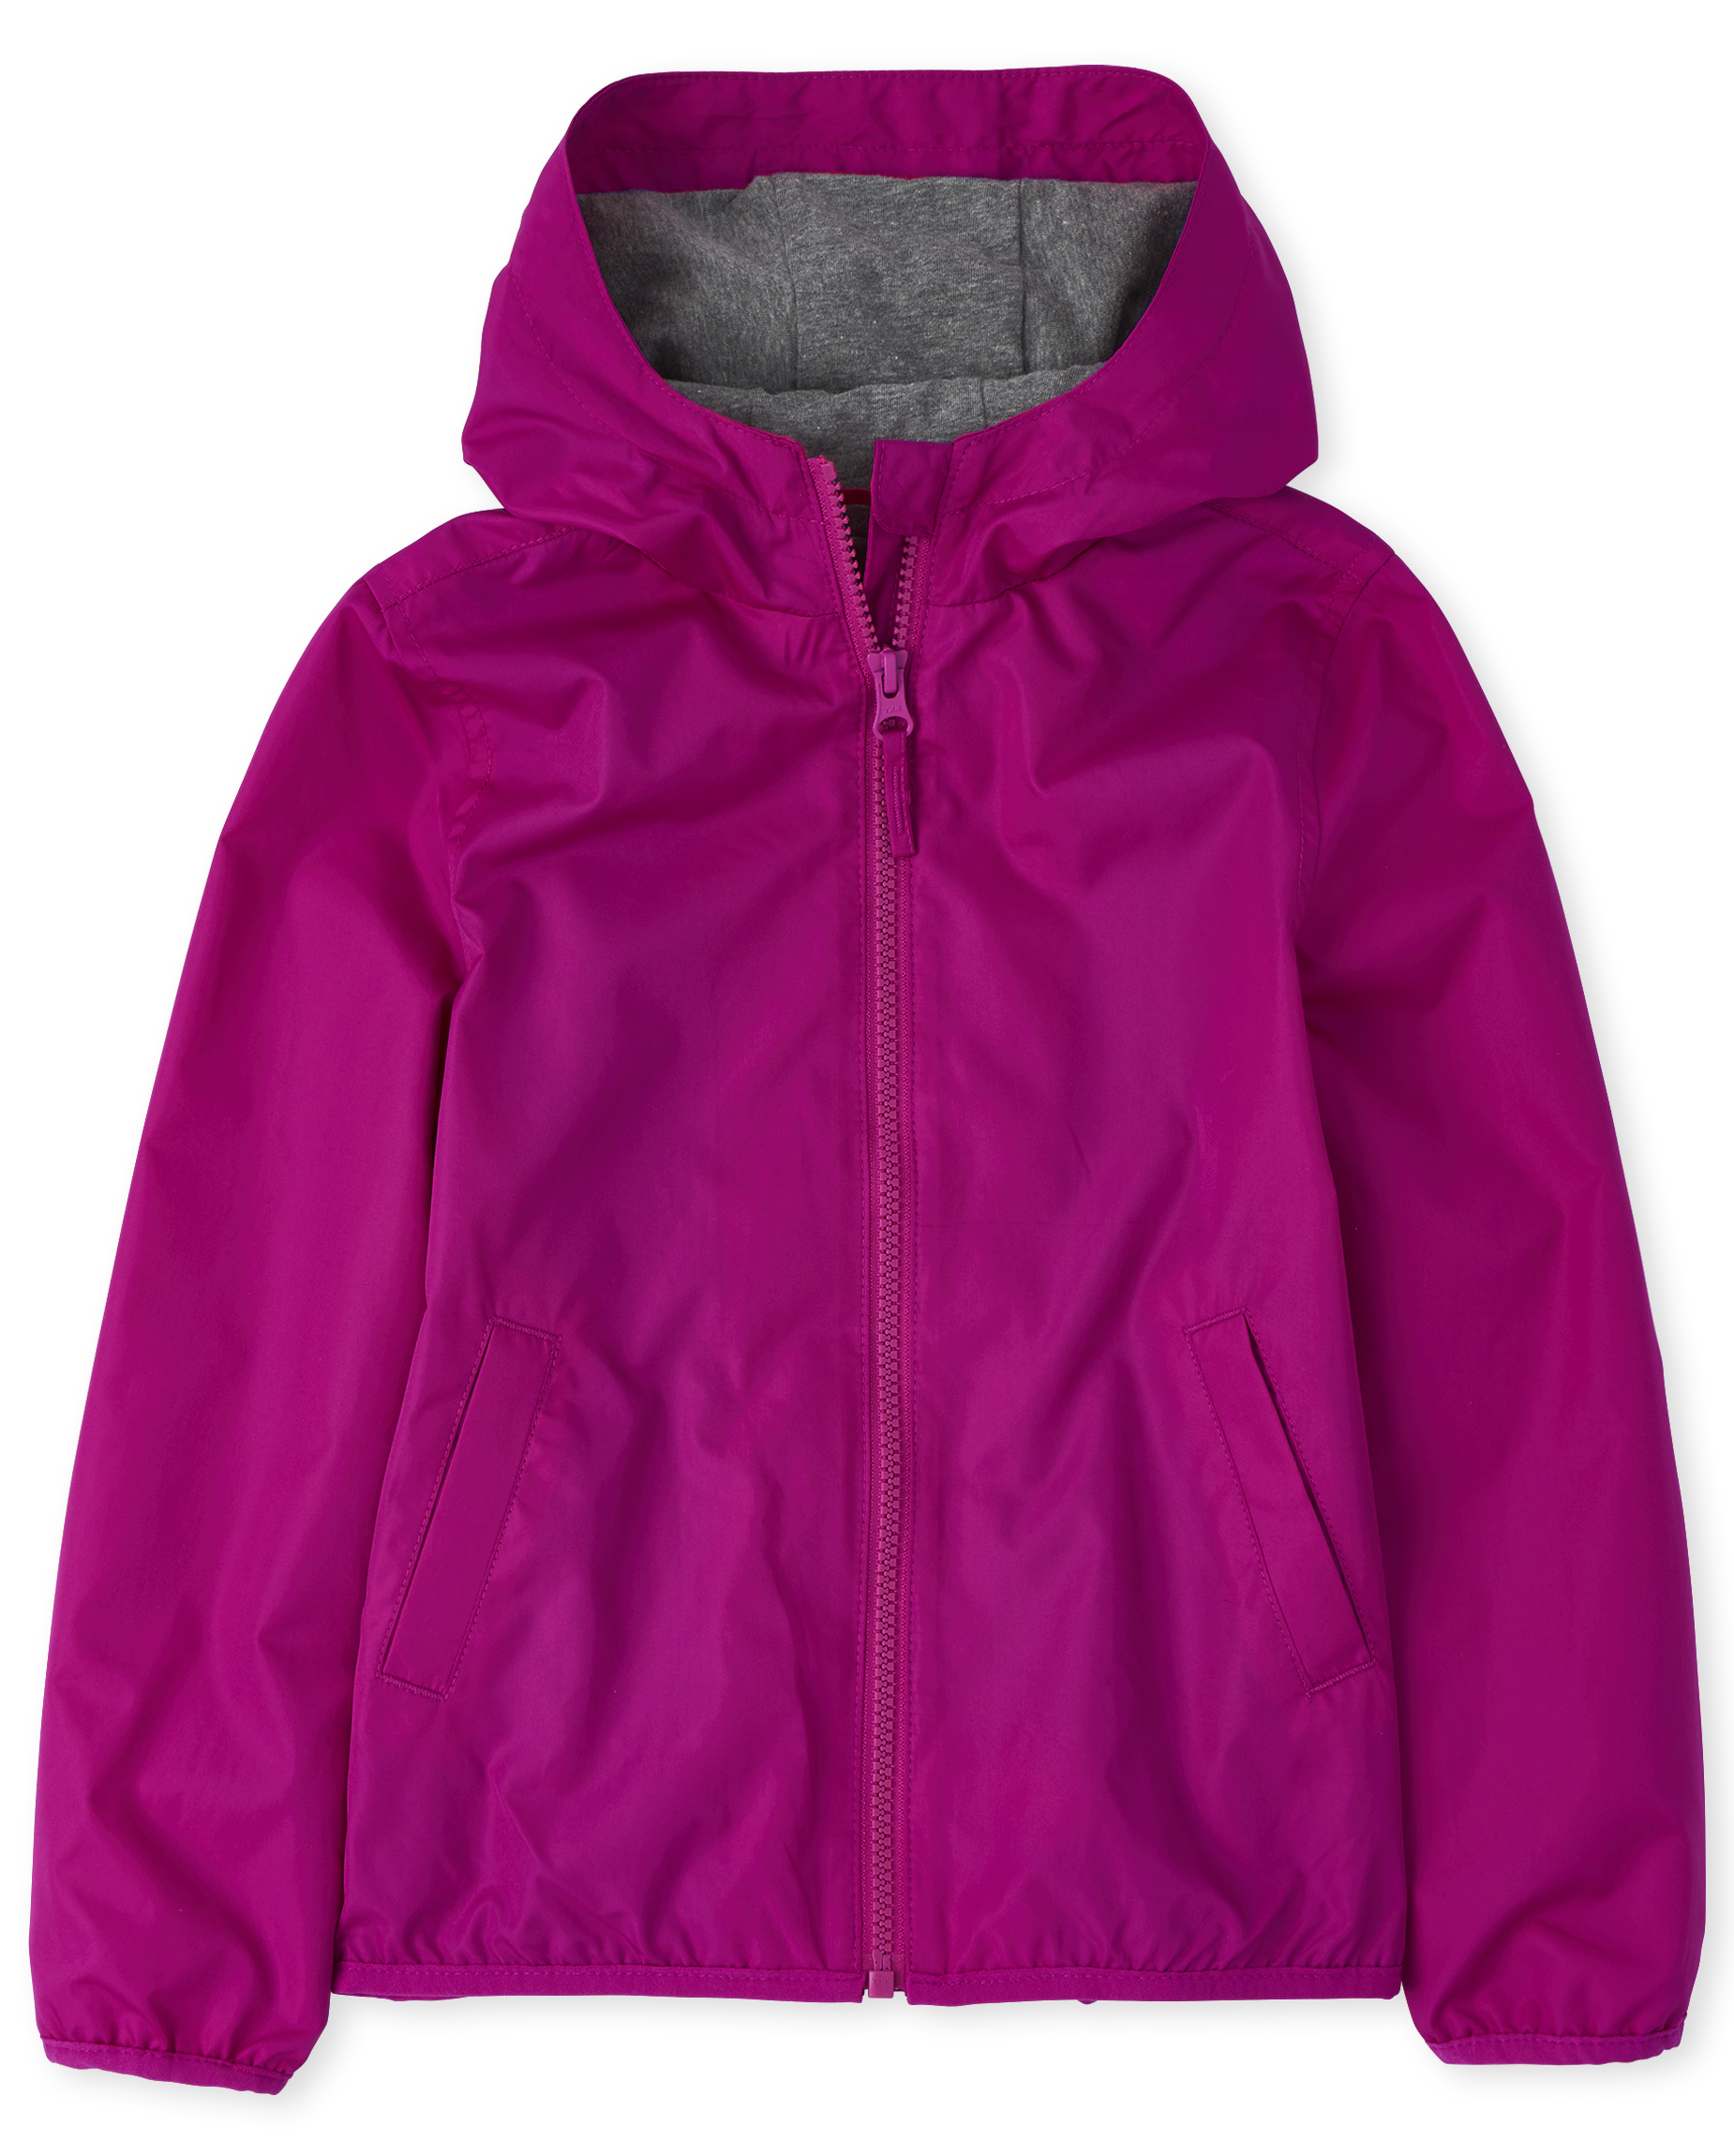 The Children's Place Girls' 3 in 1 Winter Jacket with Fleece Lining 